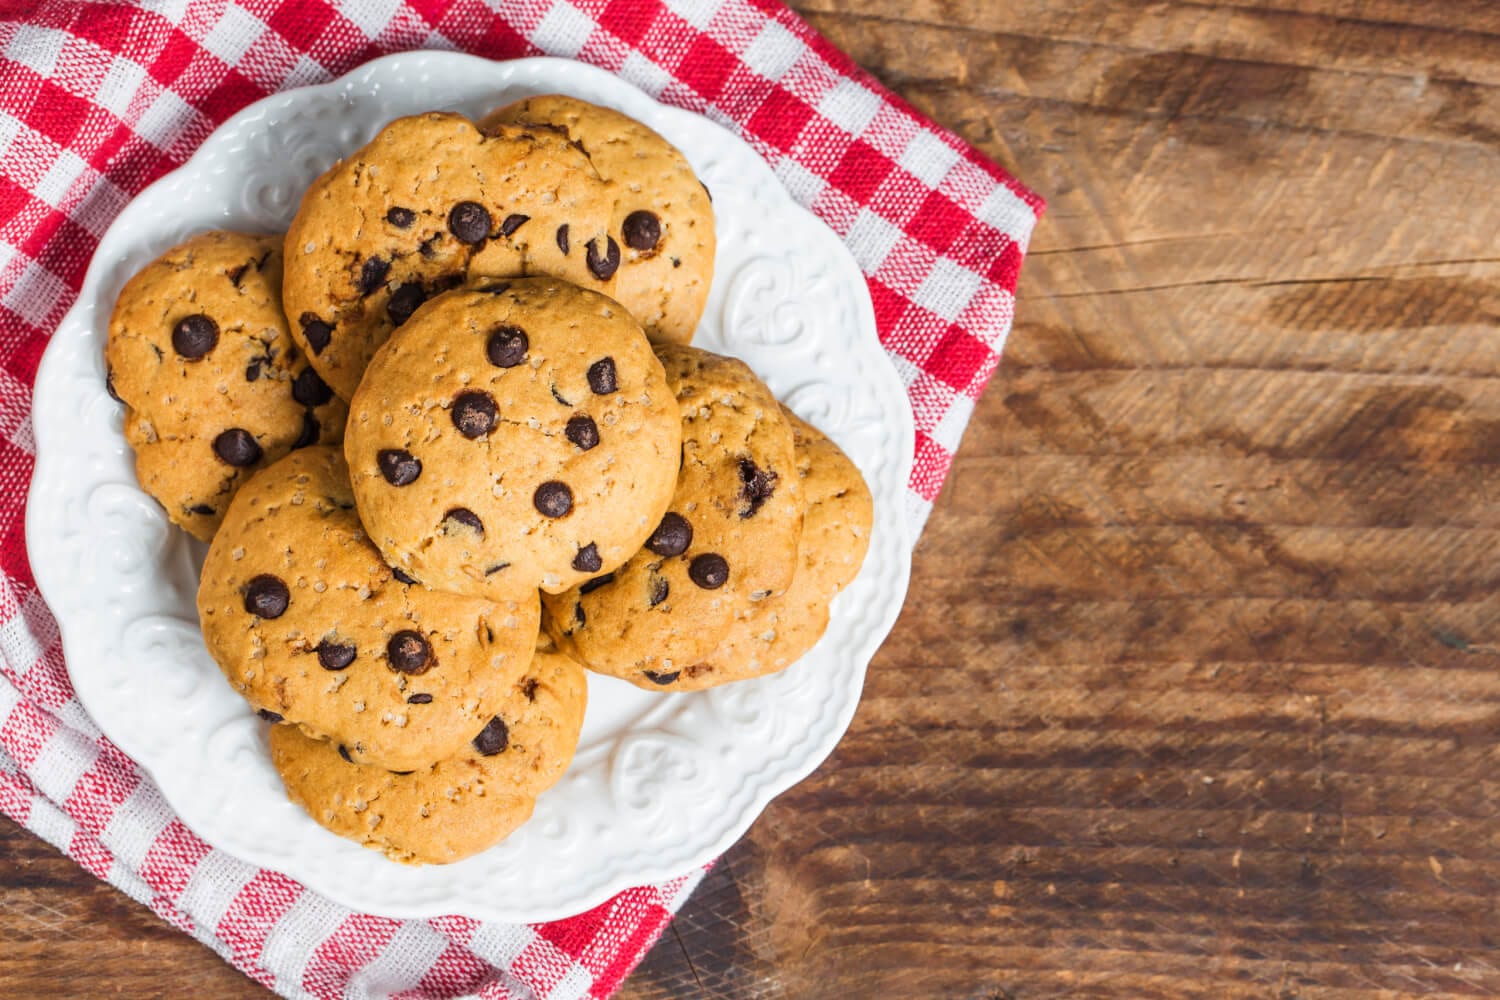 How to Make Your House Smell Like Cookies